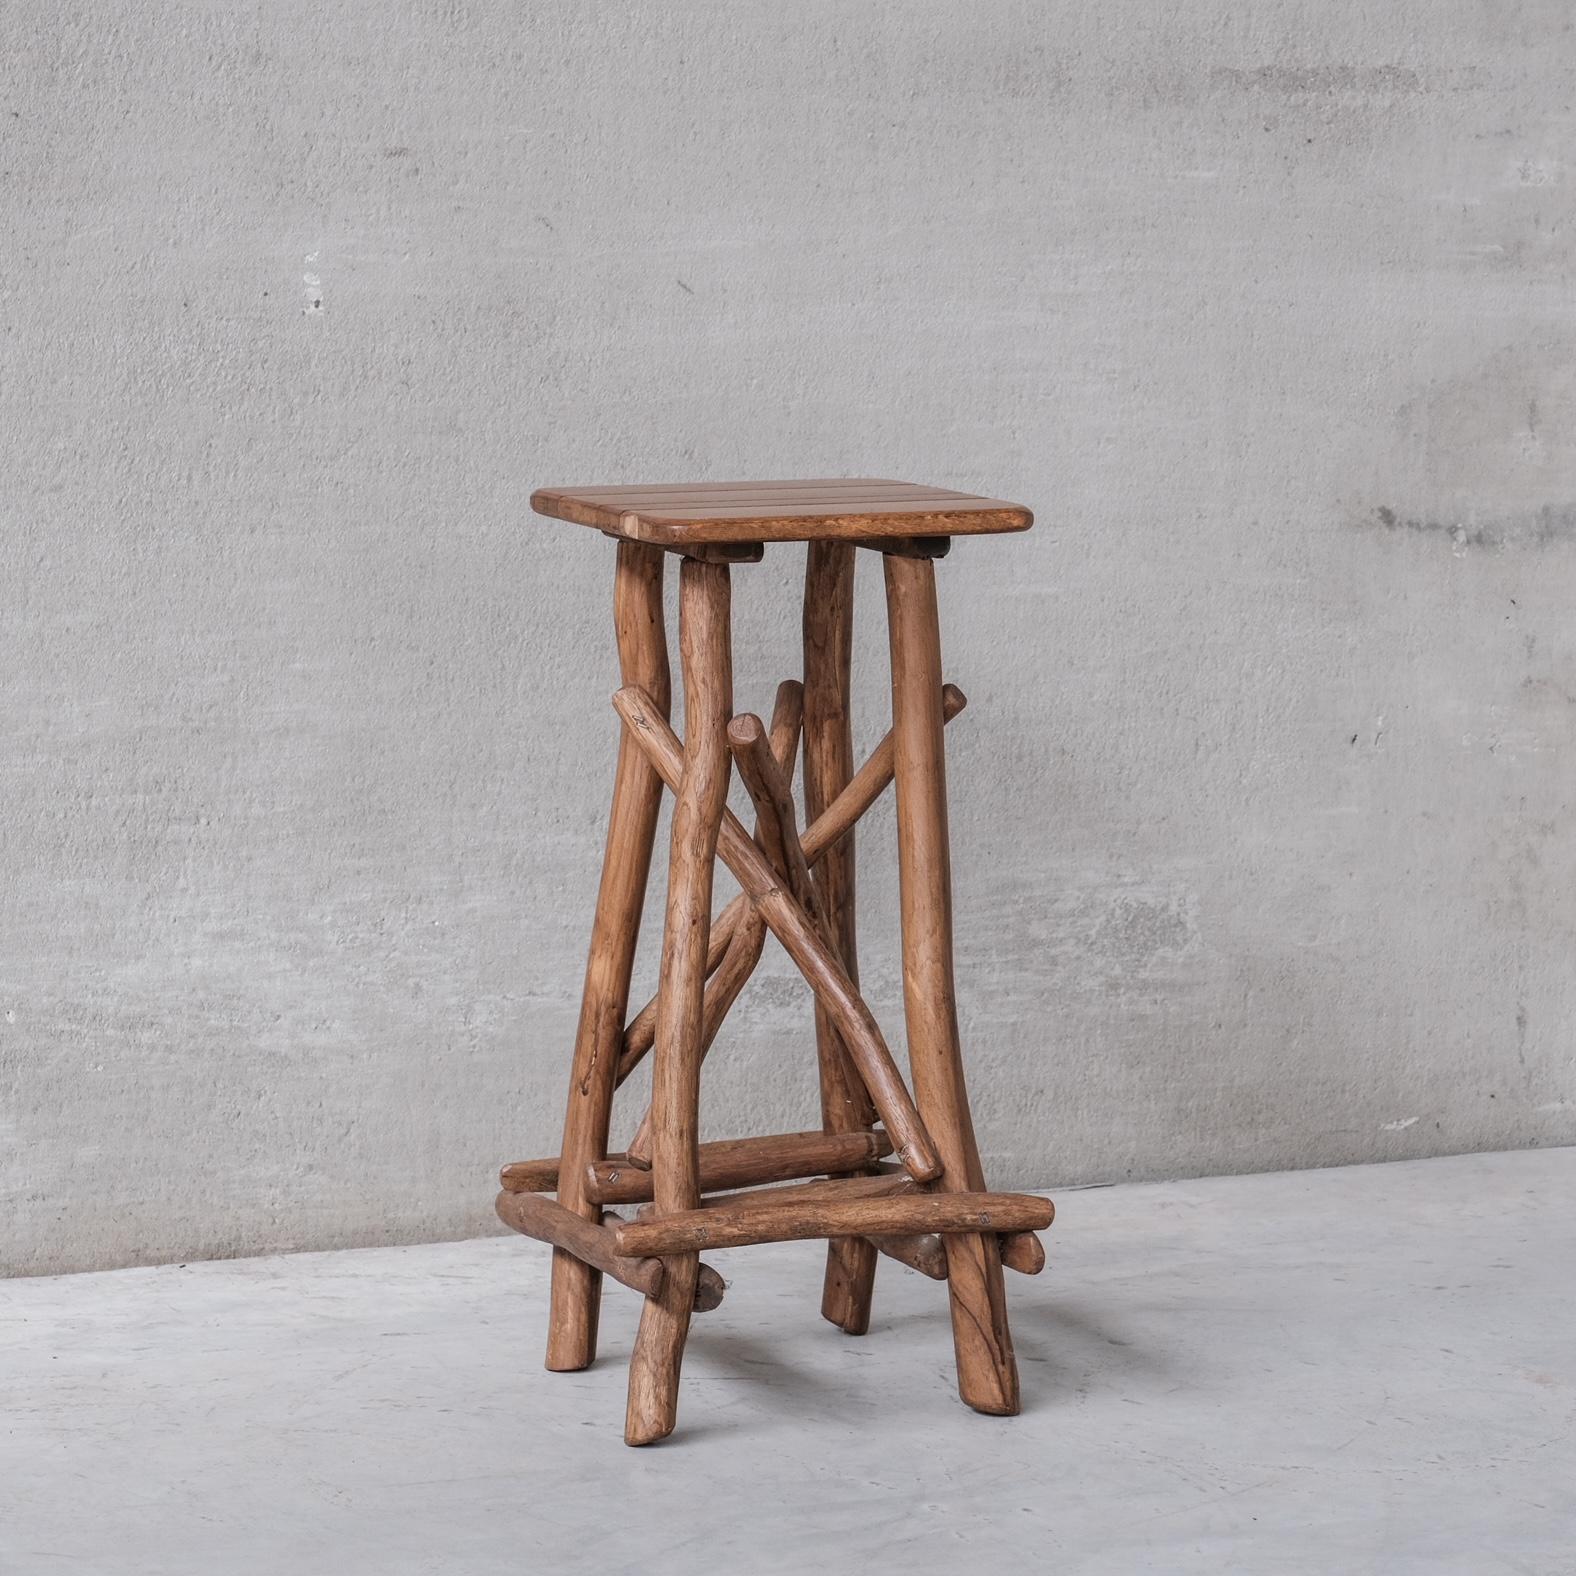 Wooden twig/Adirondack style stools or pedestals. 

Belgium, circa 1970s.

Good condition. 

Up to six available at the time of listing. 

PRICED AND SOLD INDIVIDUALLY. 

Location: Belgium Gallery. 

Dimensions: 80 H x 40 D x 40 W in cm.